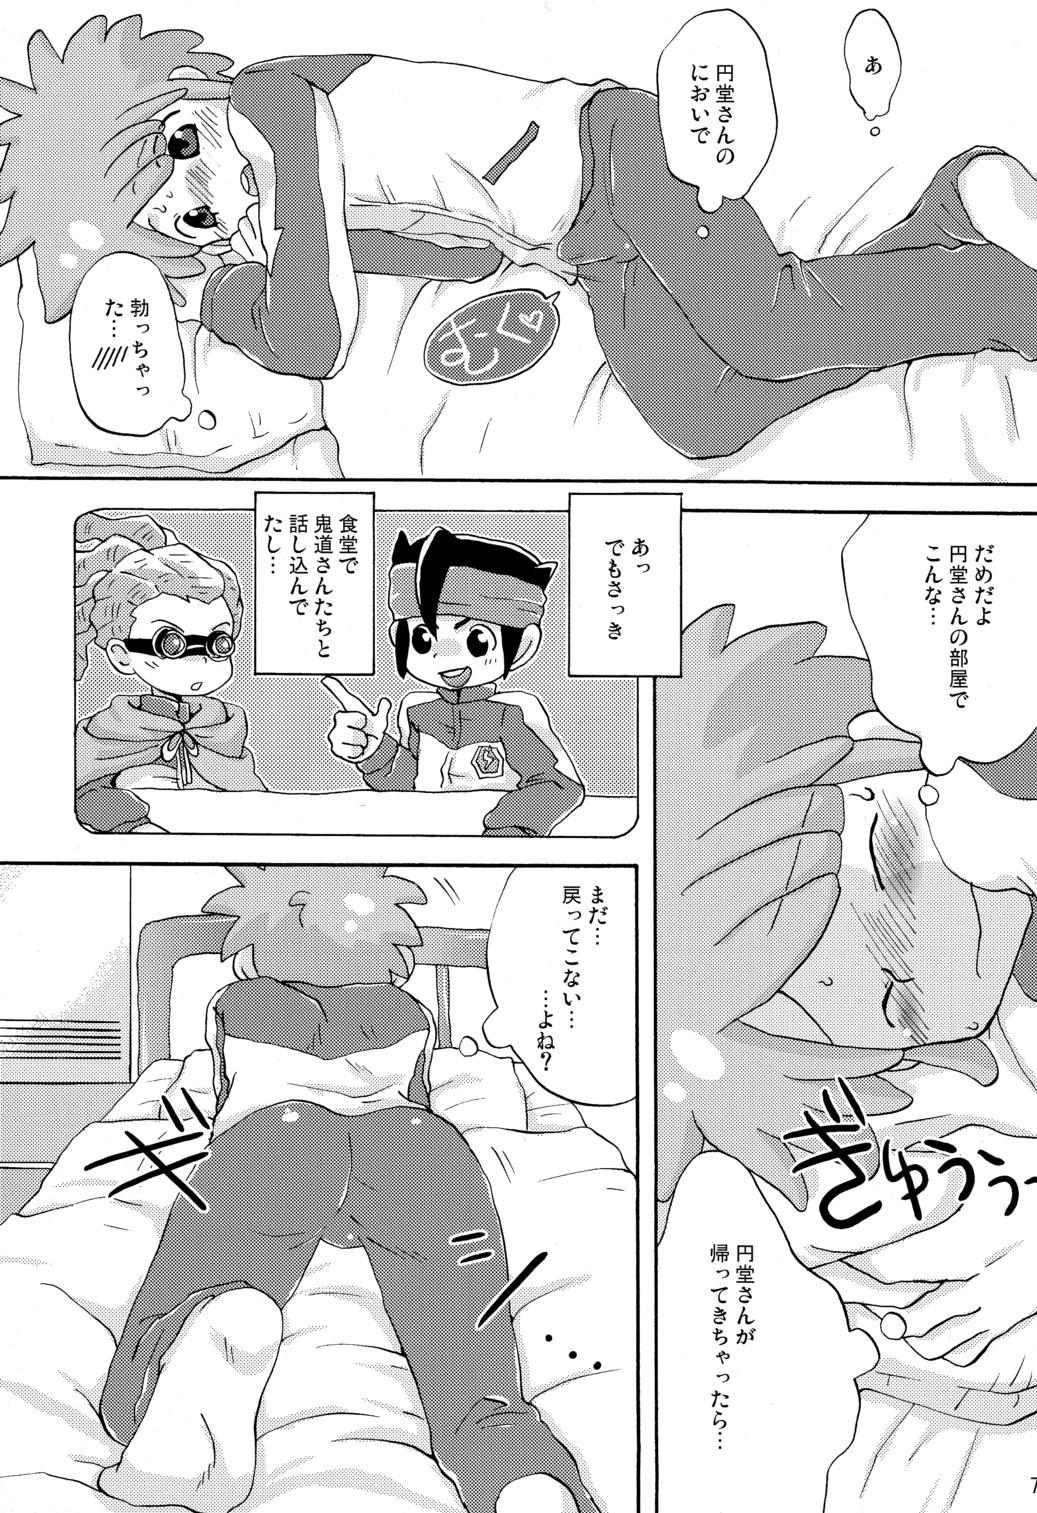 Pawg SWEET ROOM - Inazuma eleven Sweet - Page 7